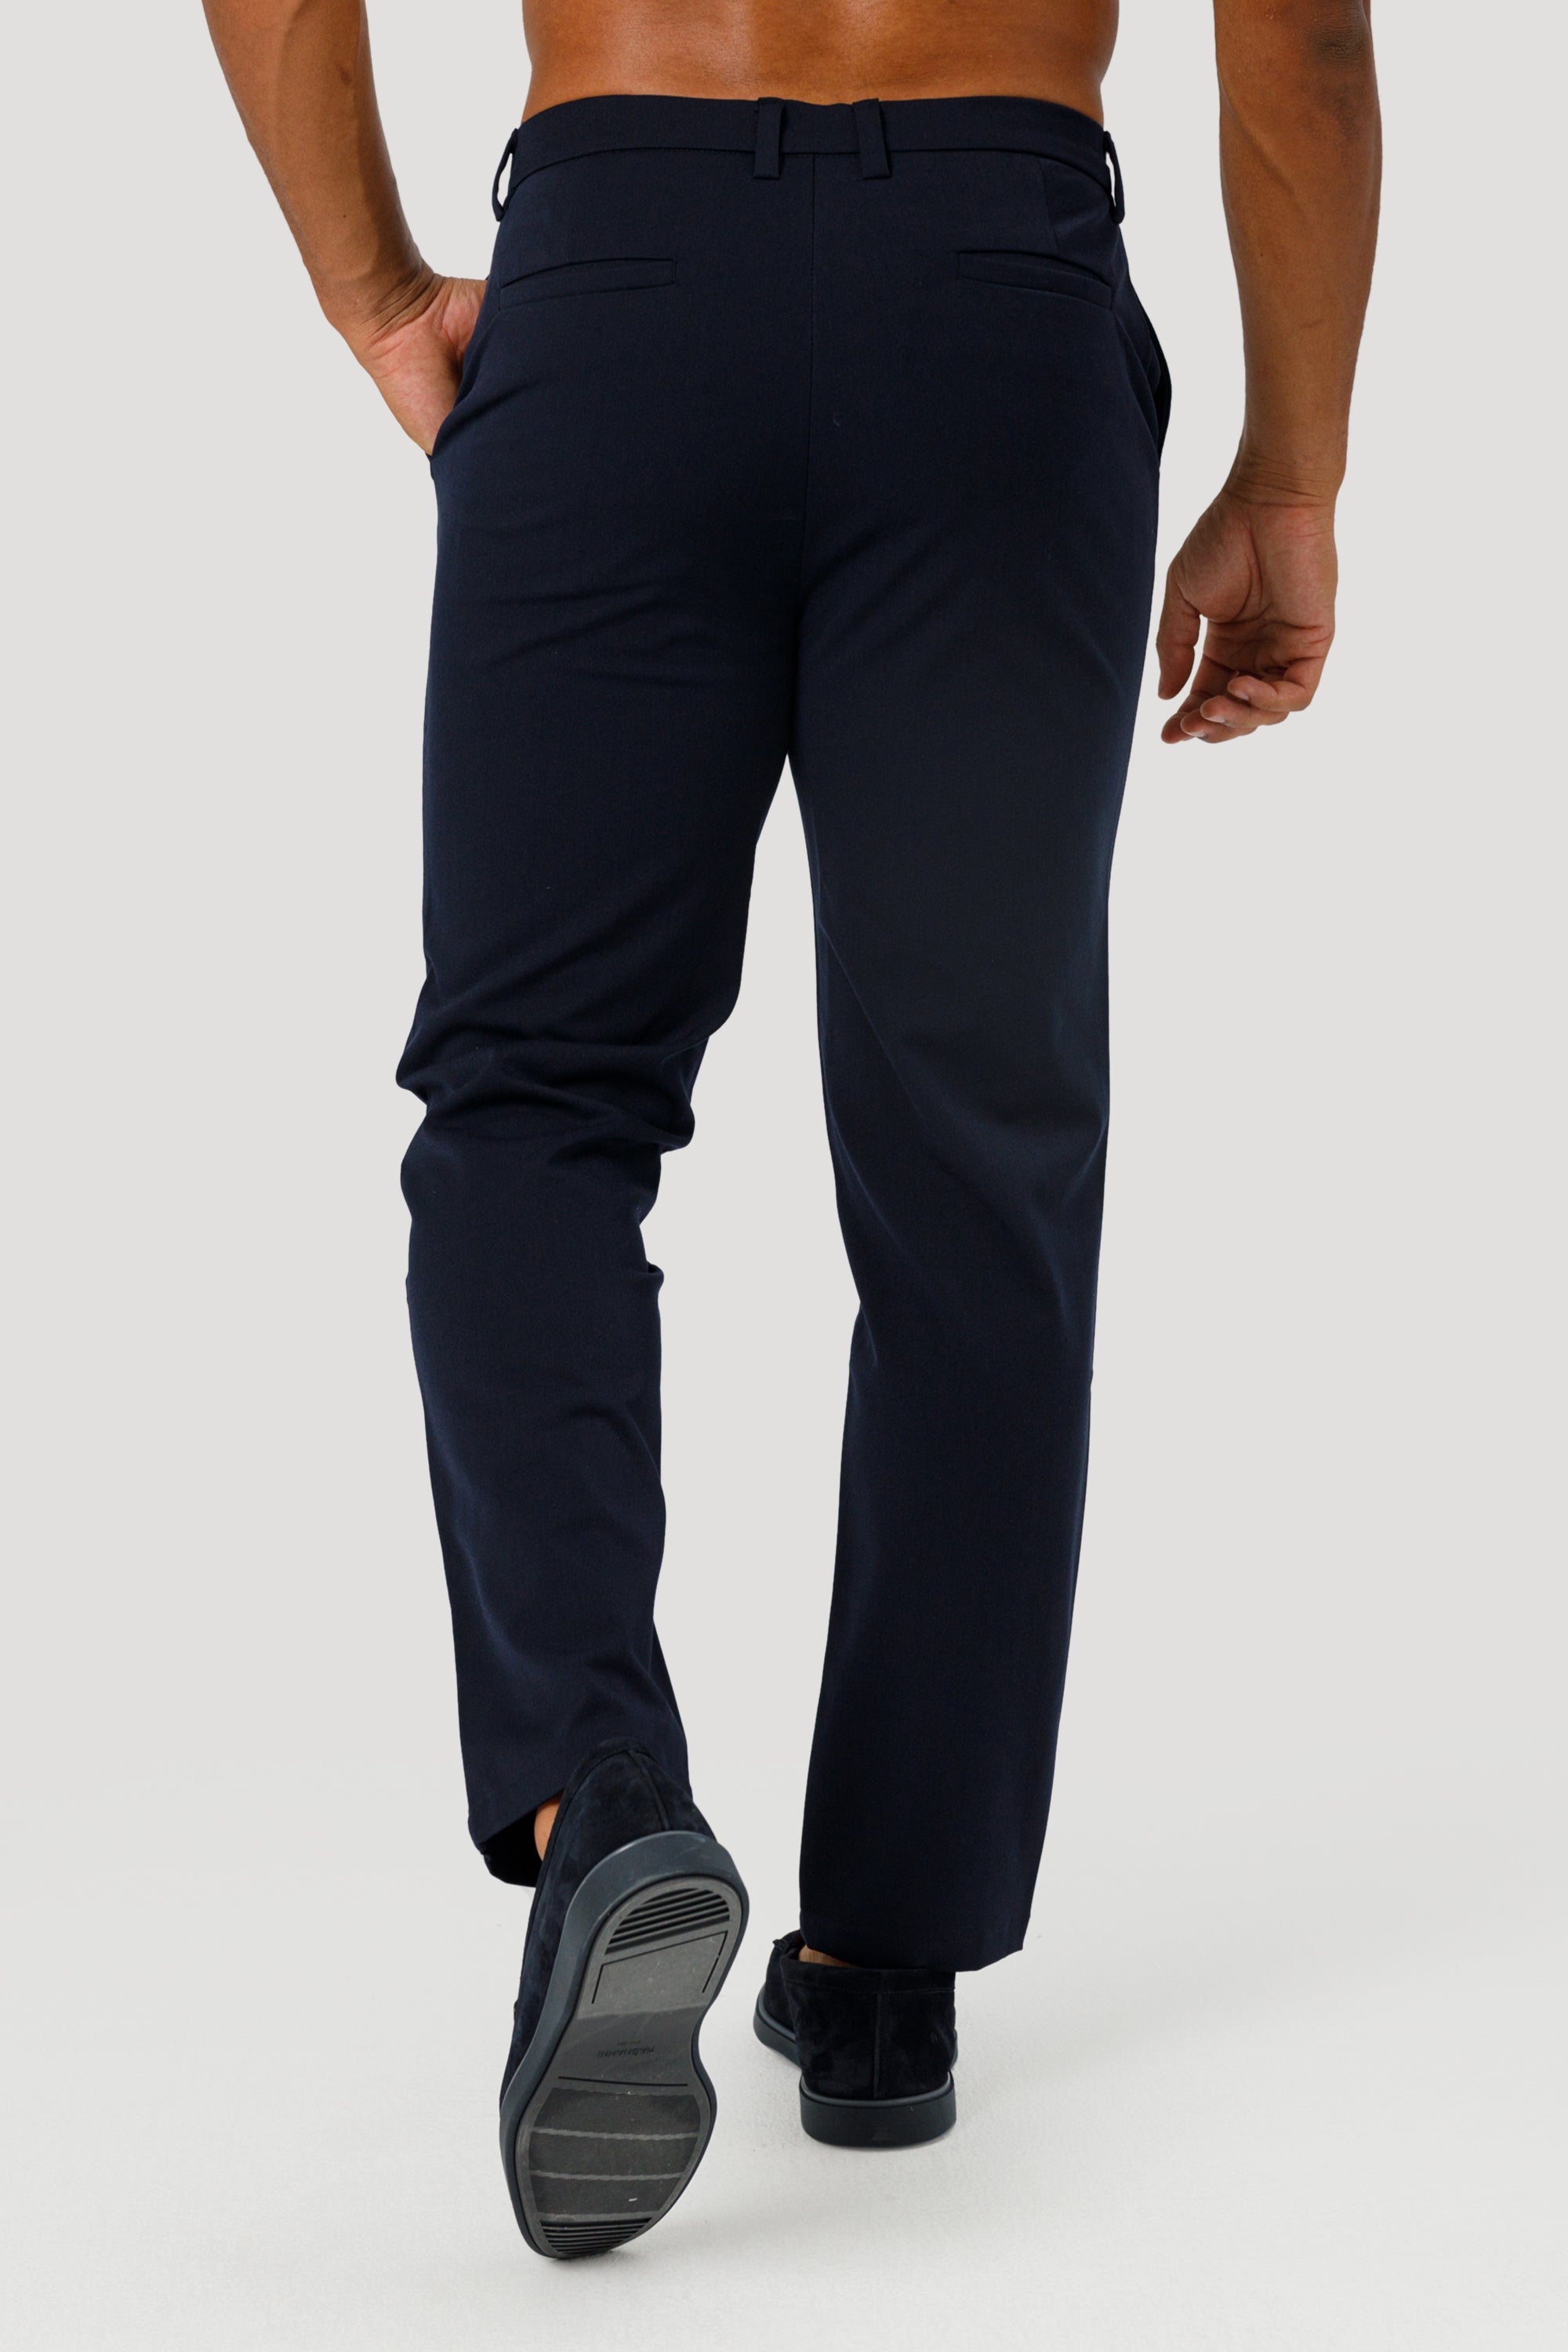 THE LUCIA TROUSERS - NAVY BLUE